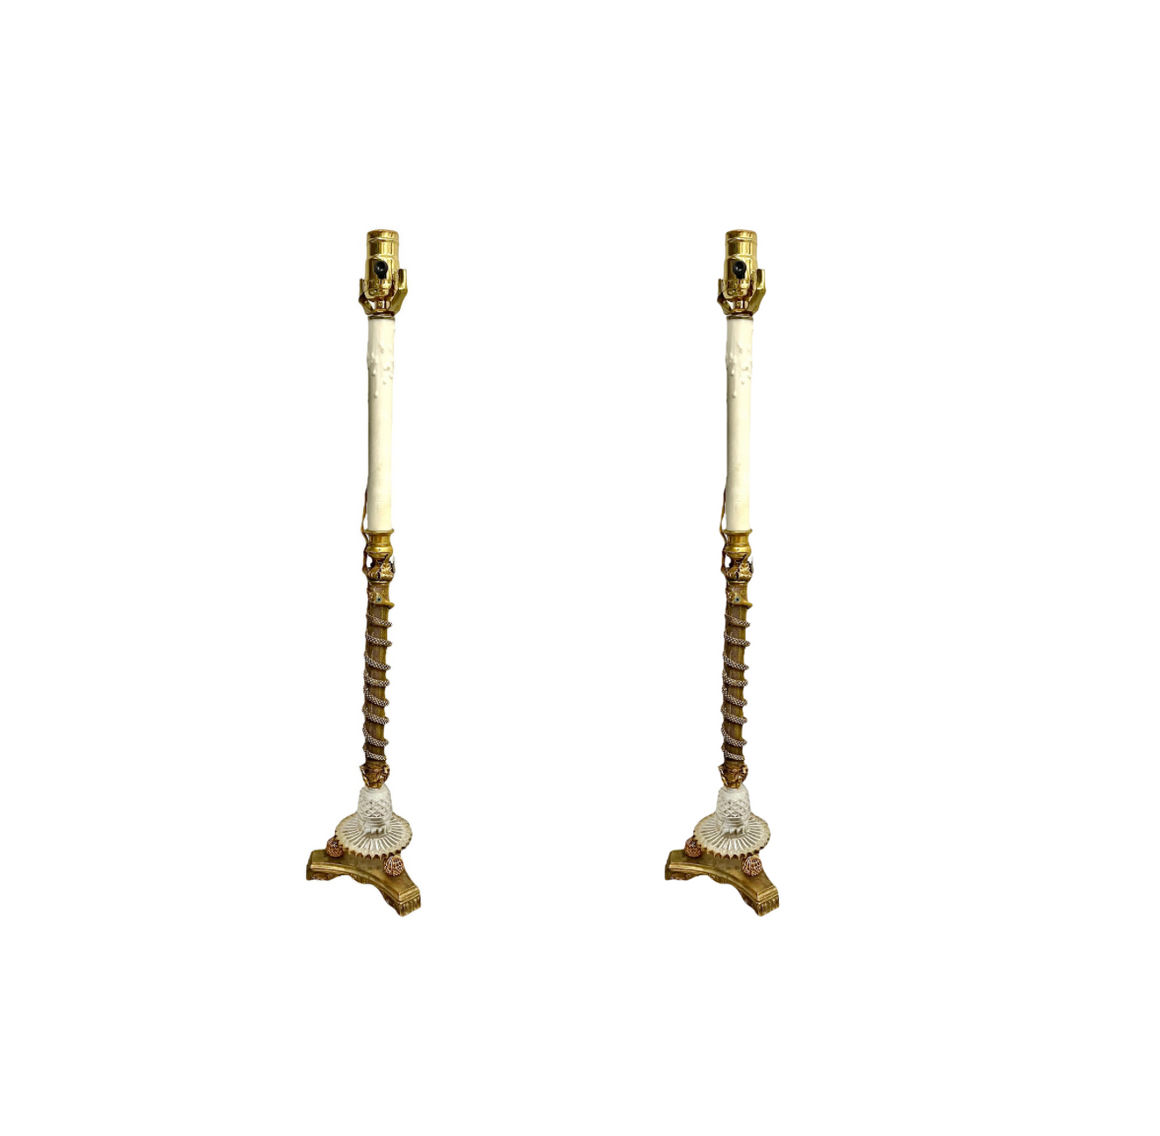 Antique French 18th Century Candle Stick Lamps, A Pair